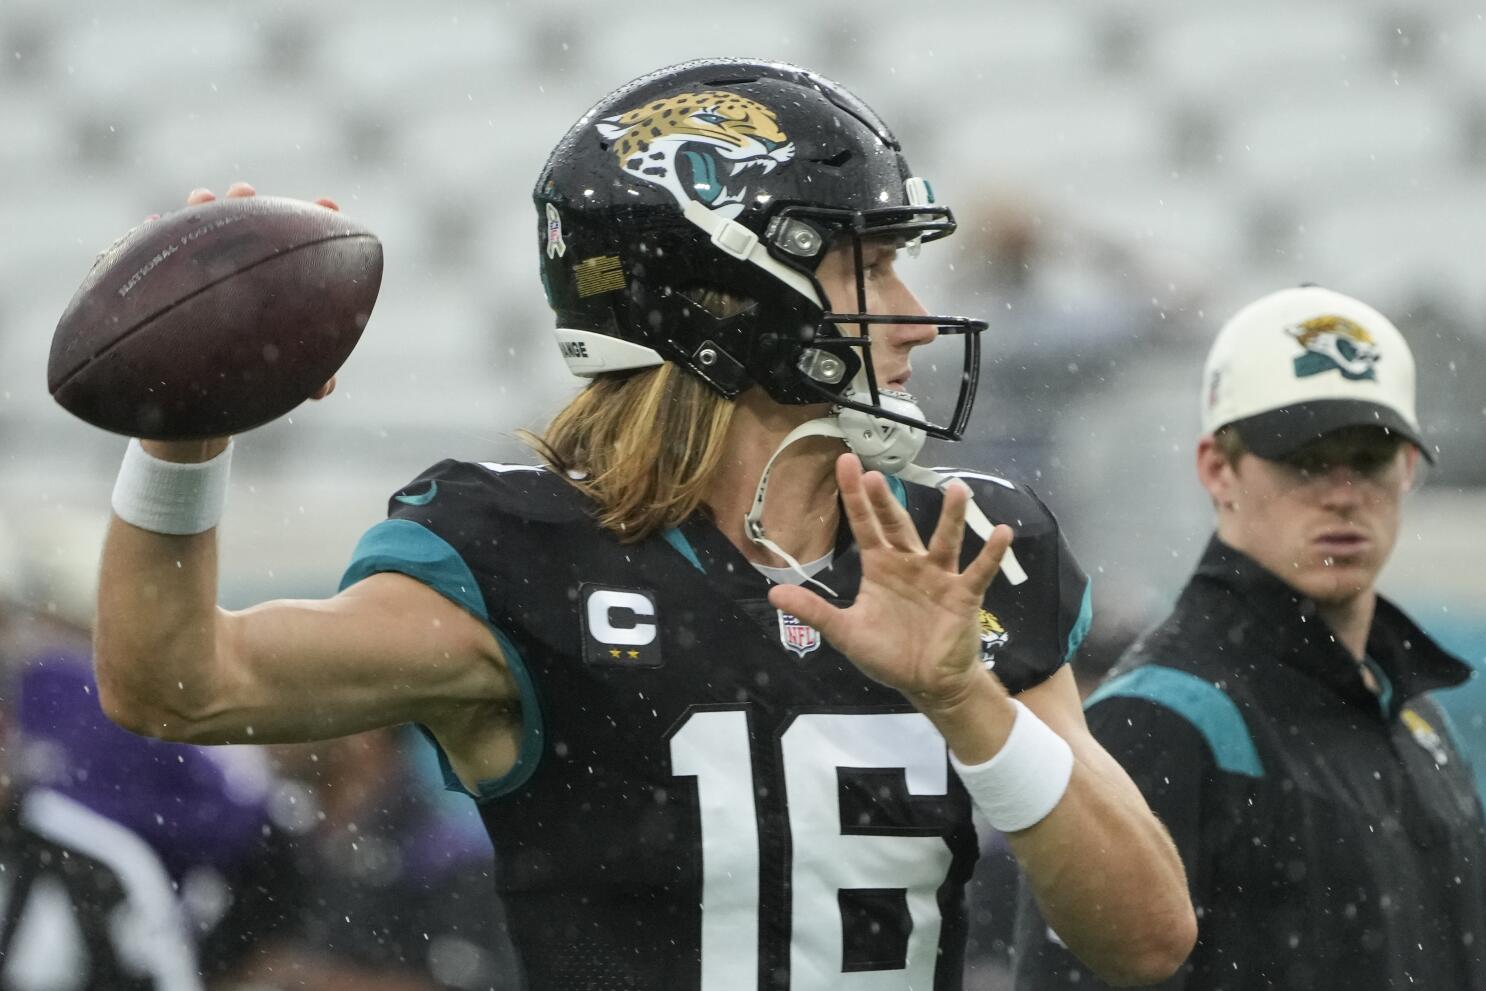 Ravens-Jaguars game delayed about 20 minutes by weather - The San